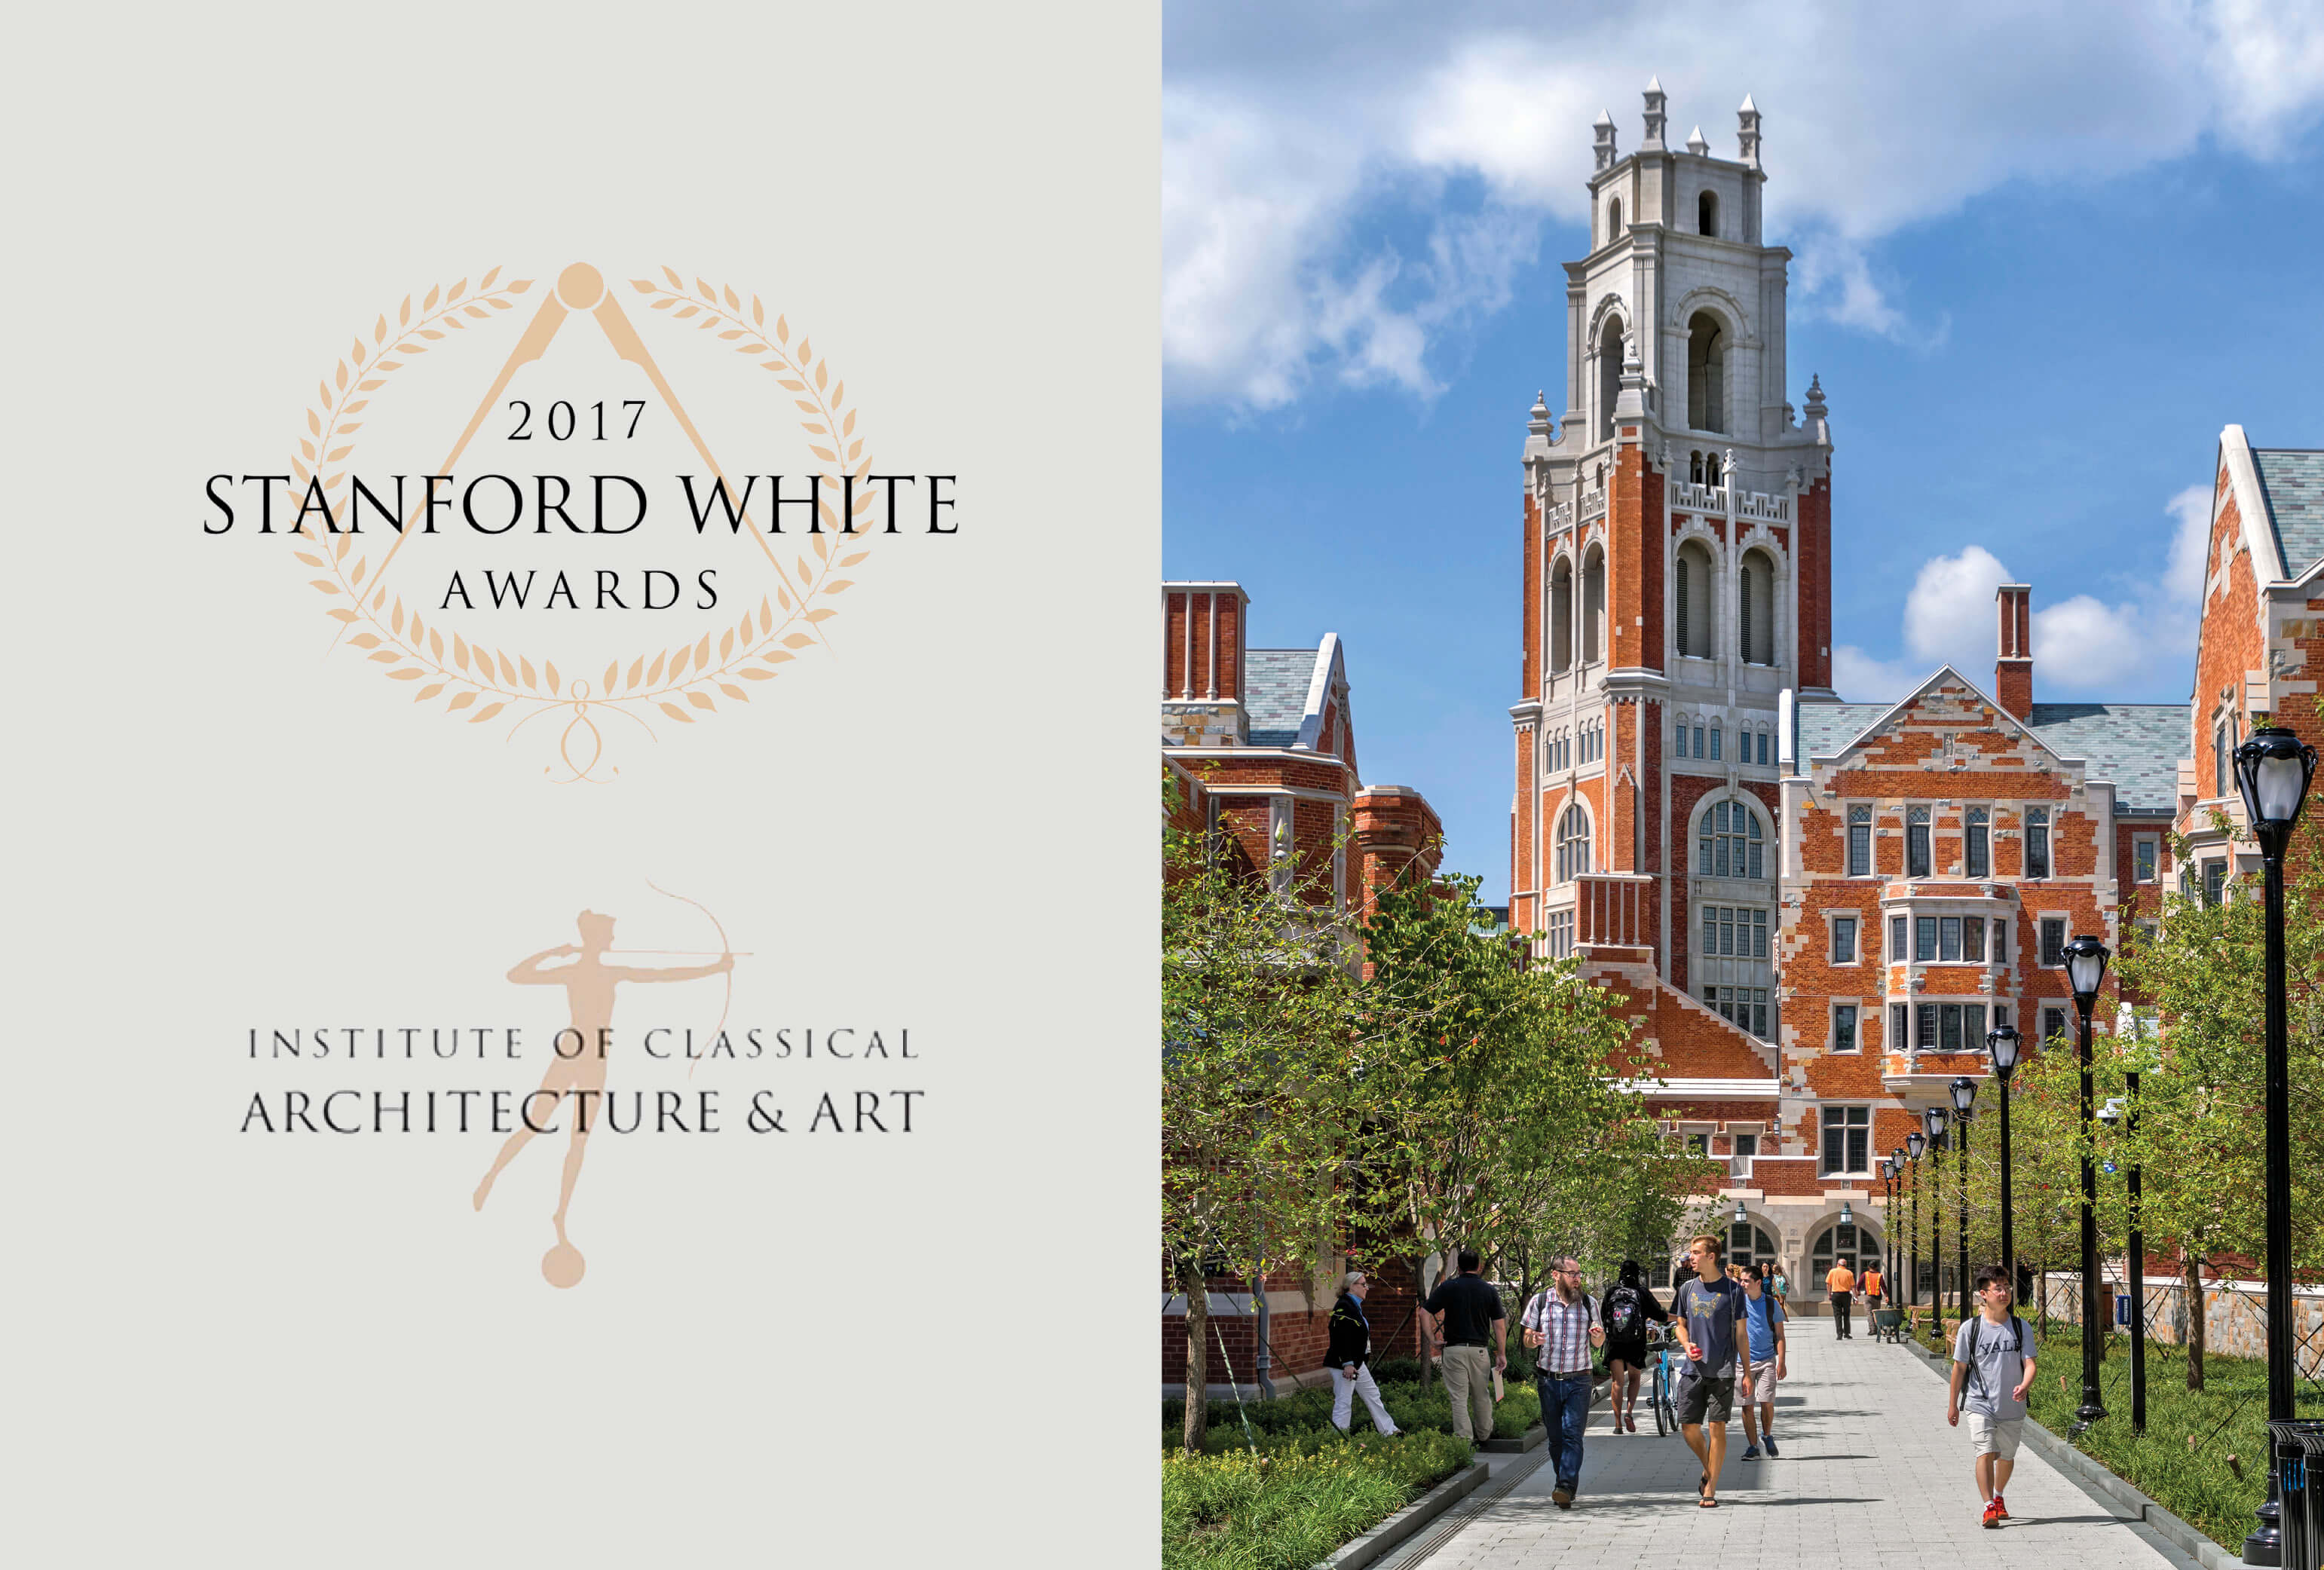 Benjamin Franklin College and Pauli Murray College at Yale University Win Stanford White Award